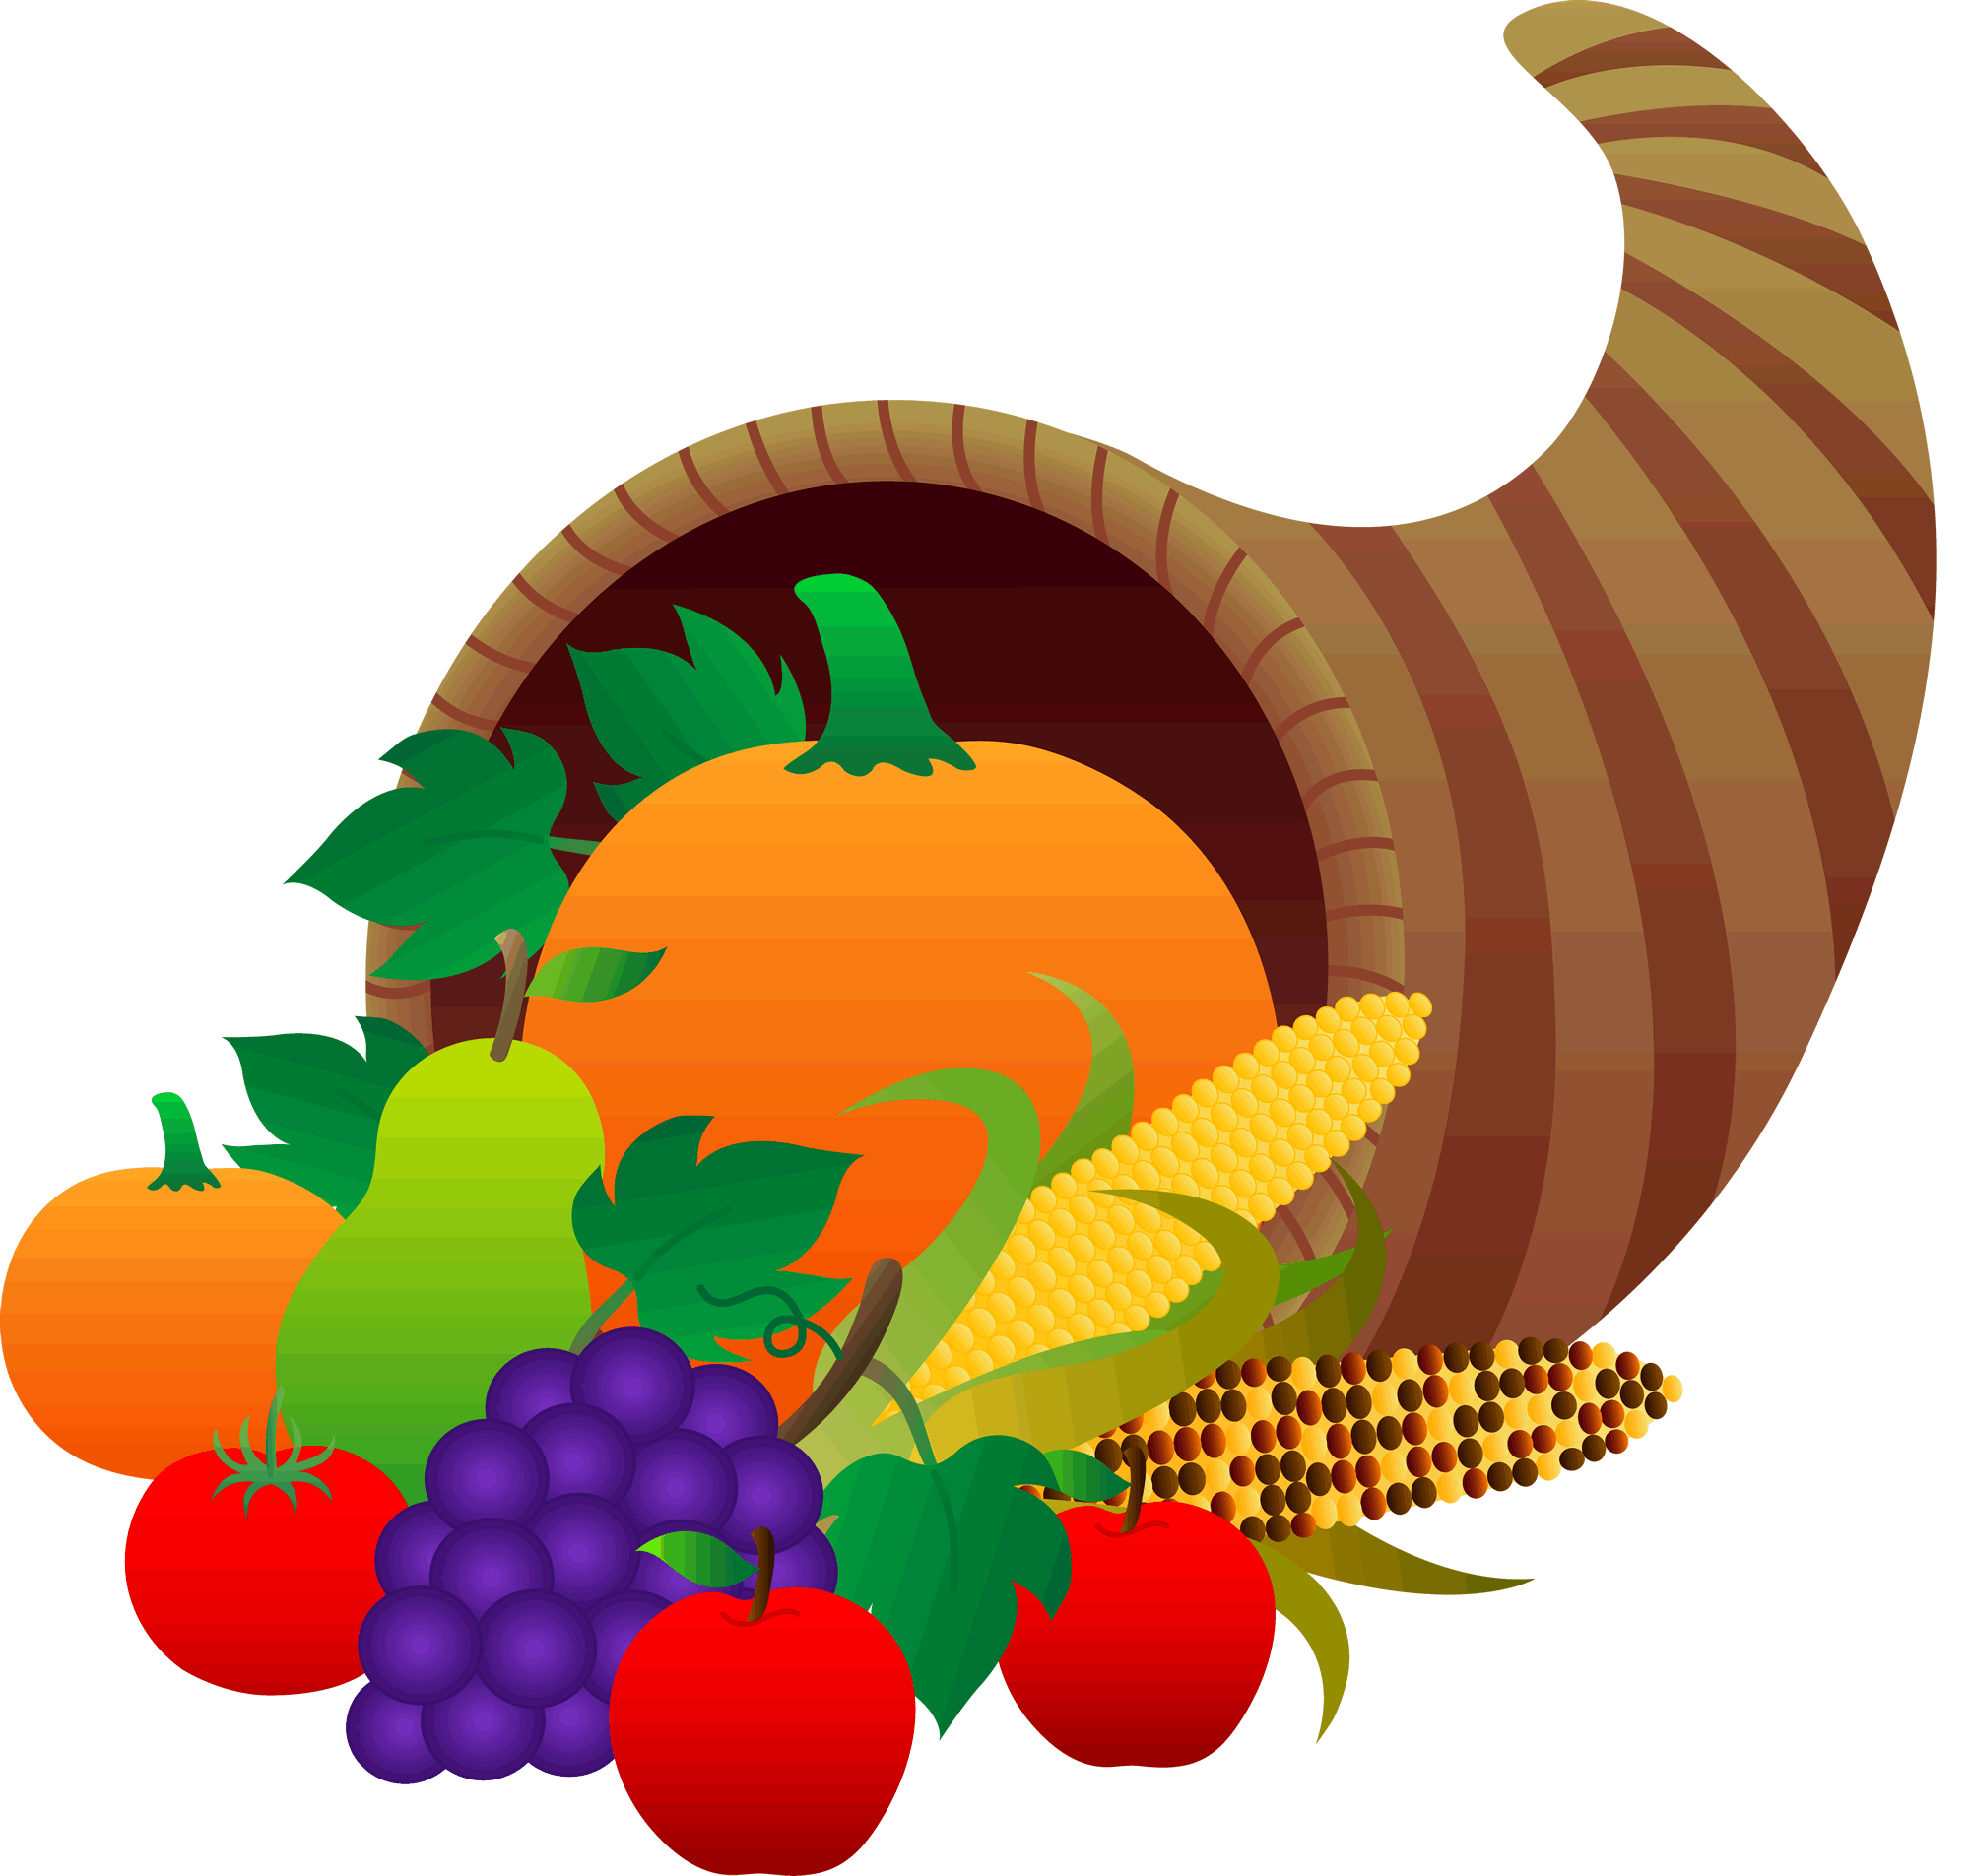 Free thanksgiving cliparts.